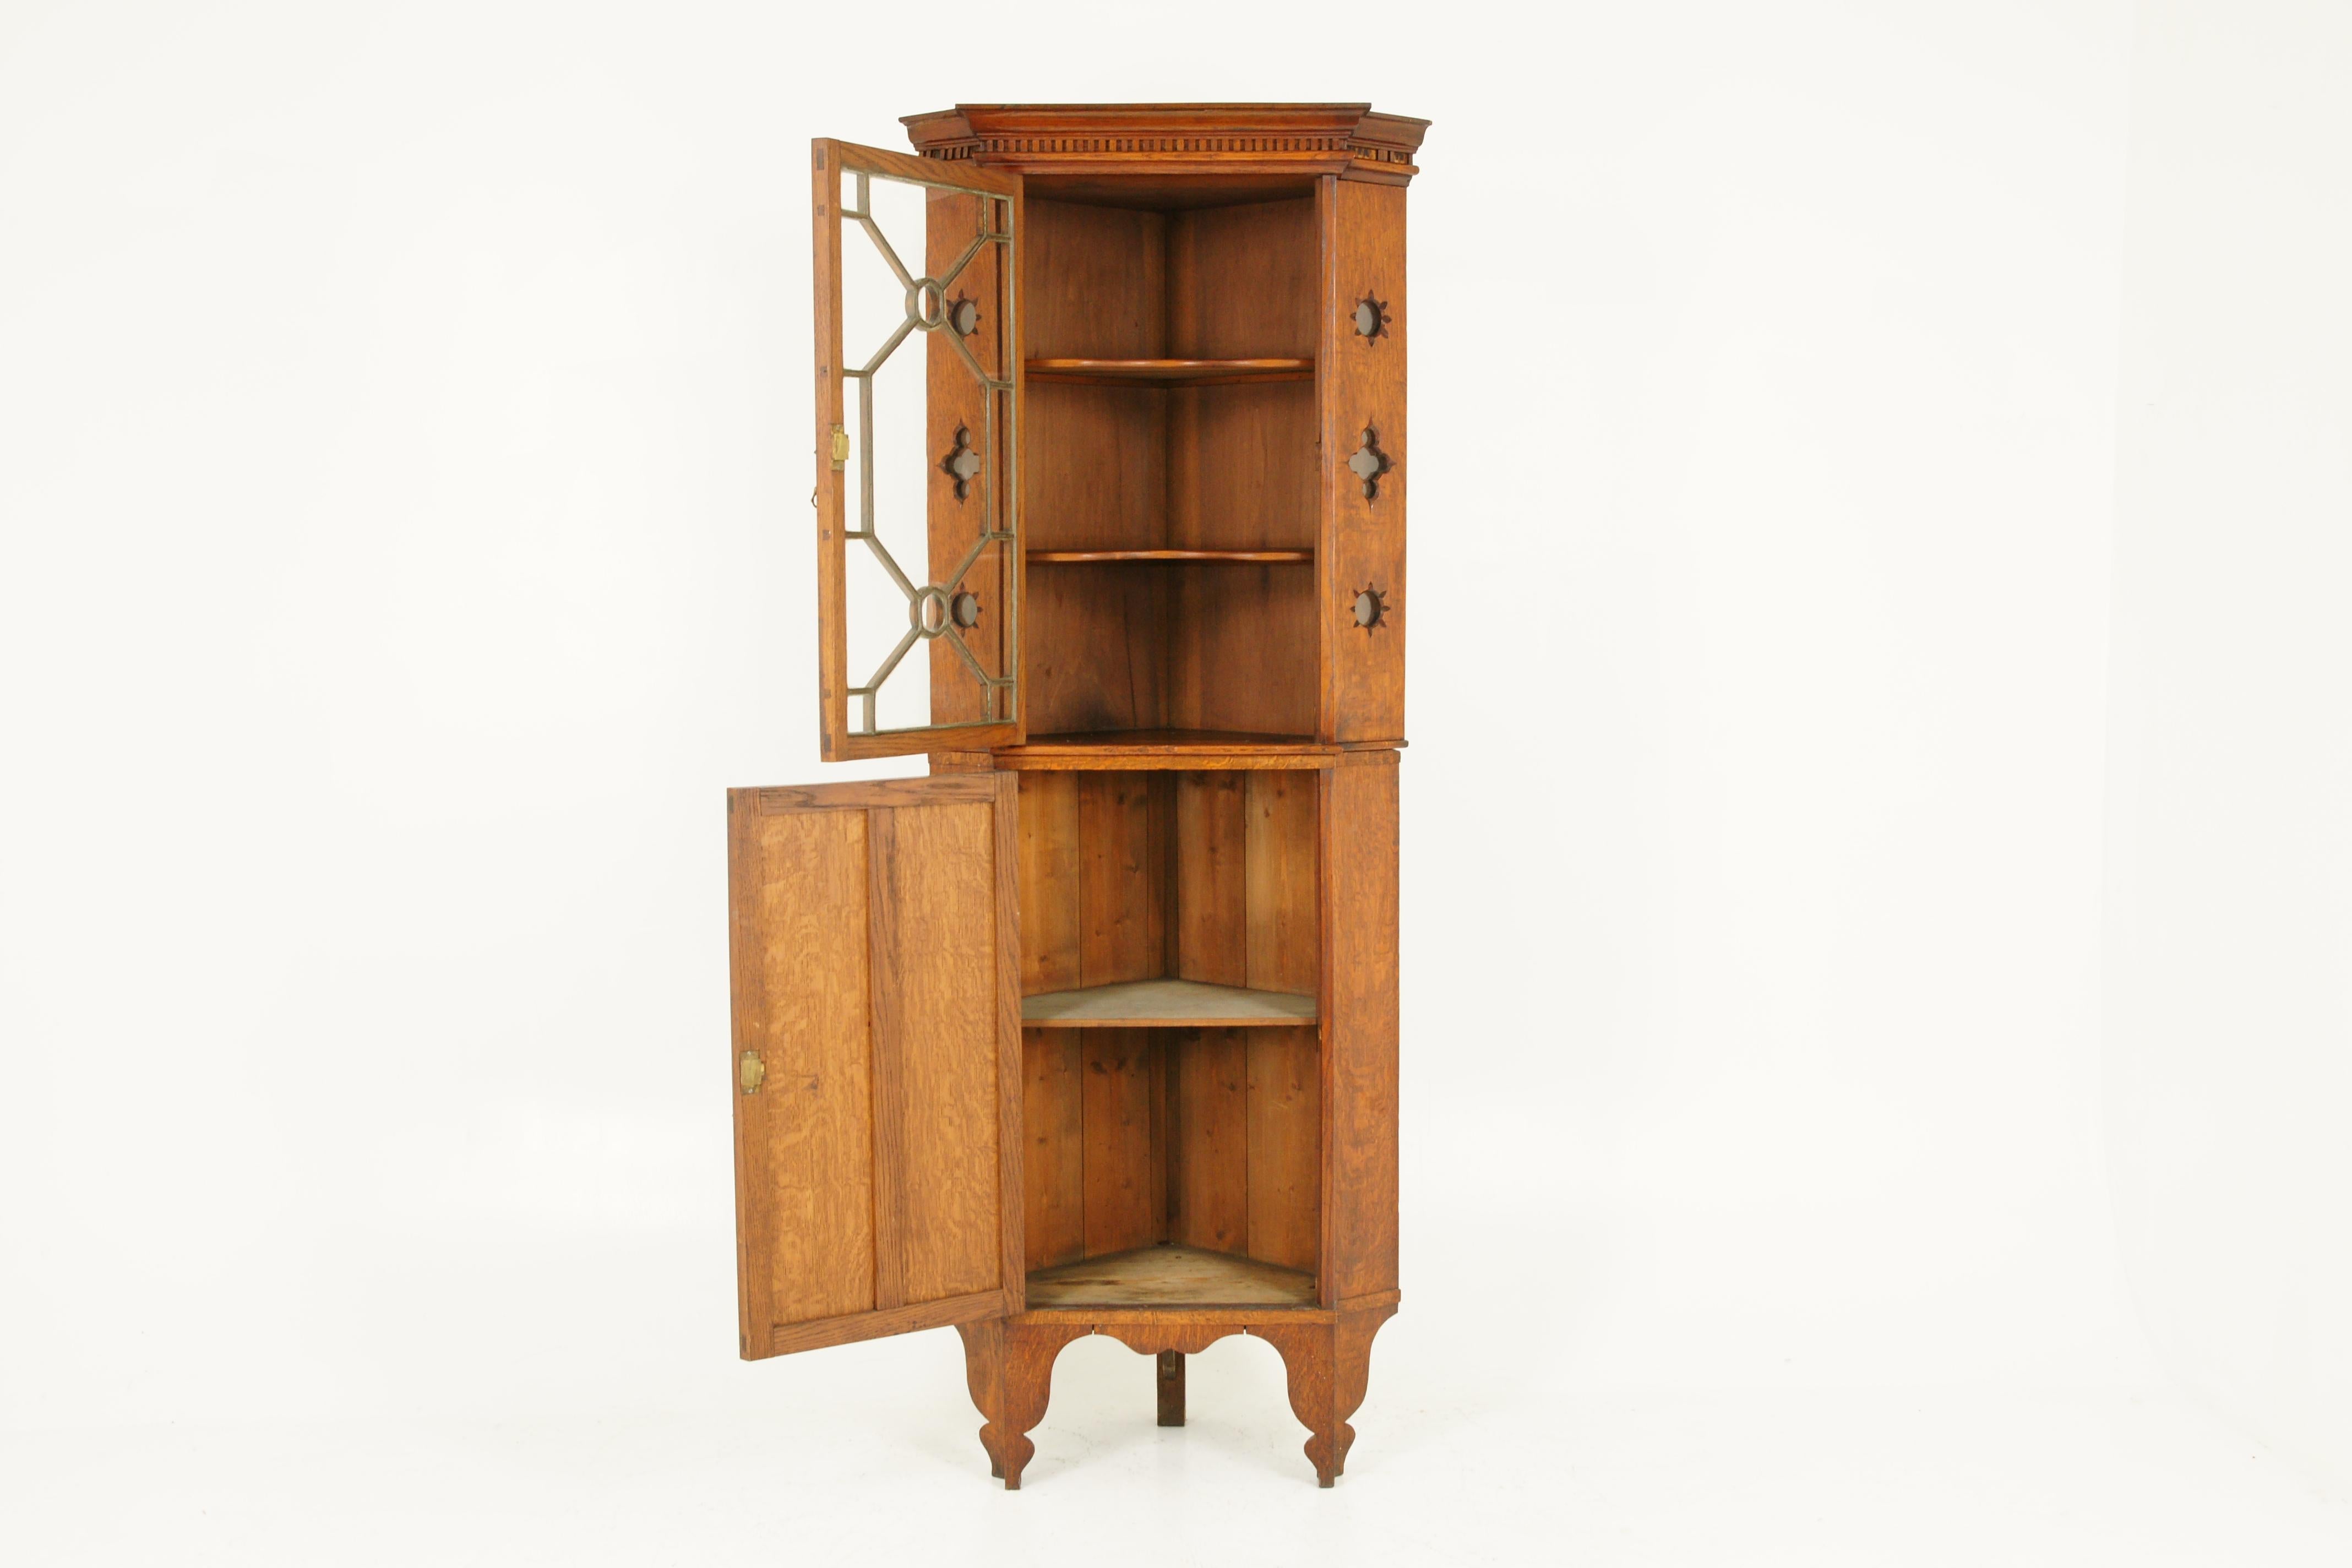 Antique corner cabinet, Arts & Crafts, tiger oak, entryway furniture, B1633

Scotland 1910
Solid tiger oak with original finish
Overhanging dentil cornice above
Single glass door with 15 original glass panes
Original lock and key
Open to reveal a